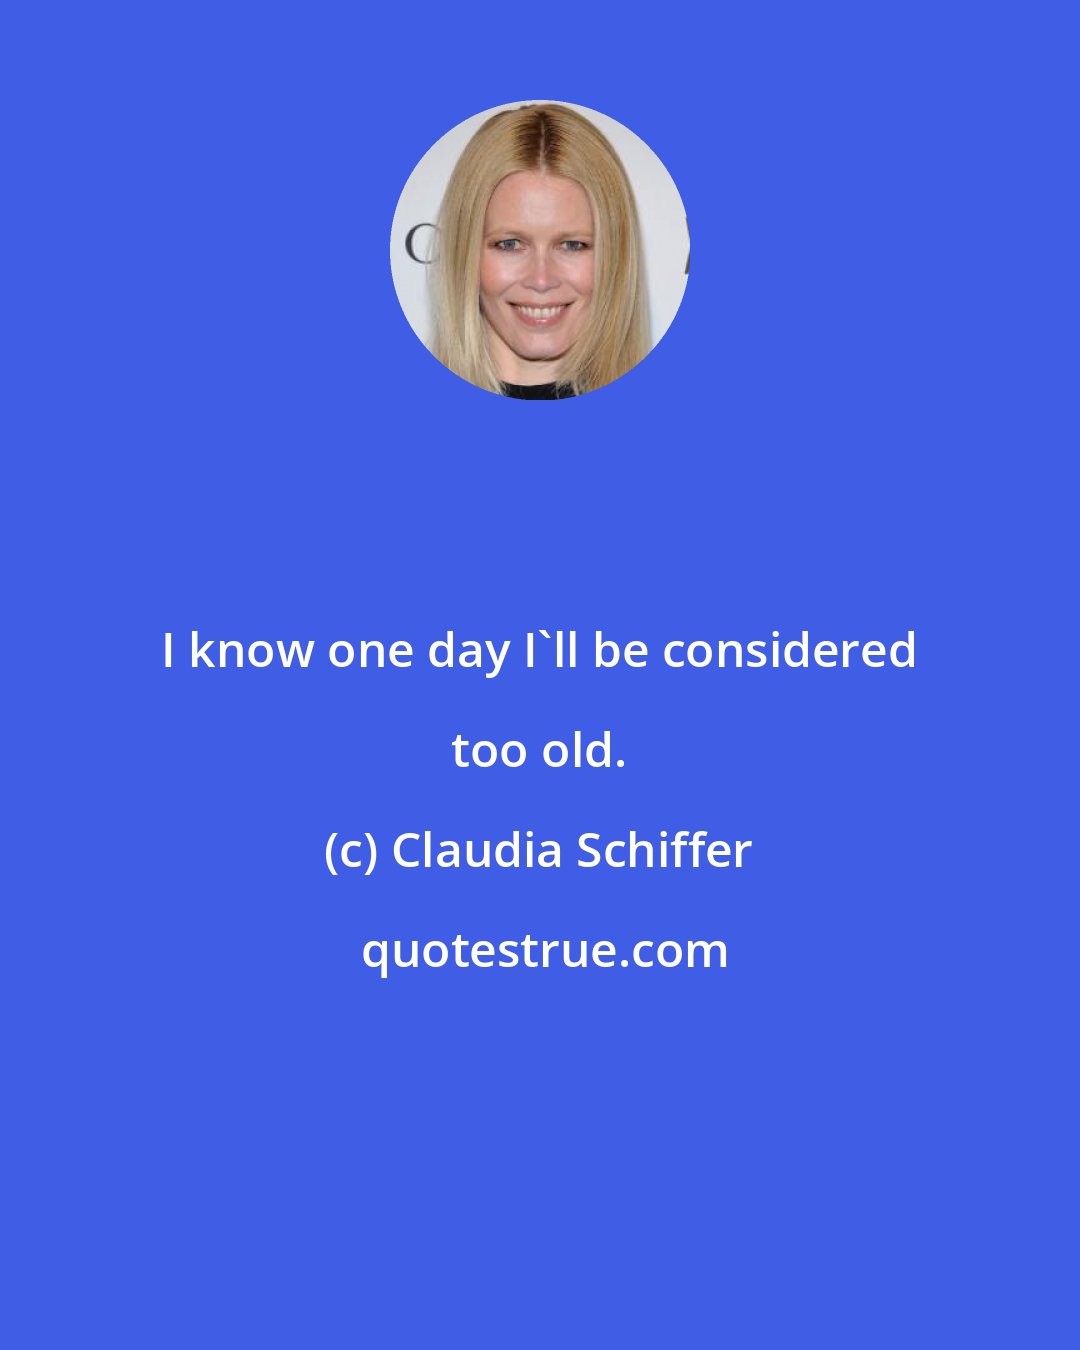 Claudia Schiffer: I know one day I'll be considered too old.